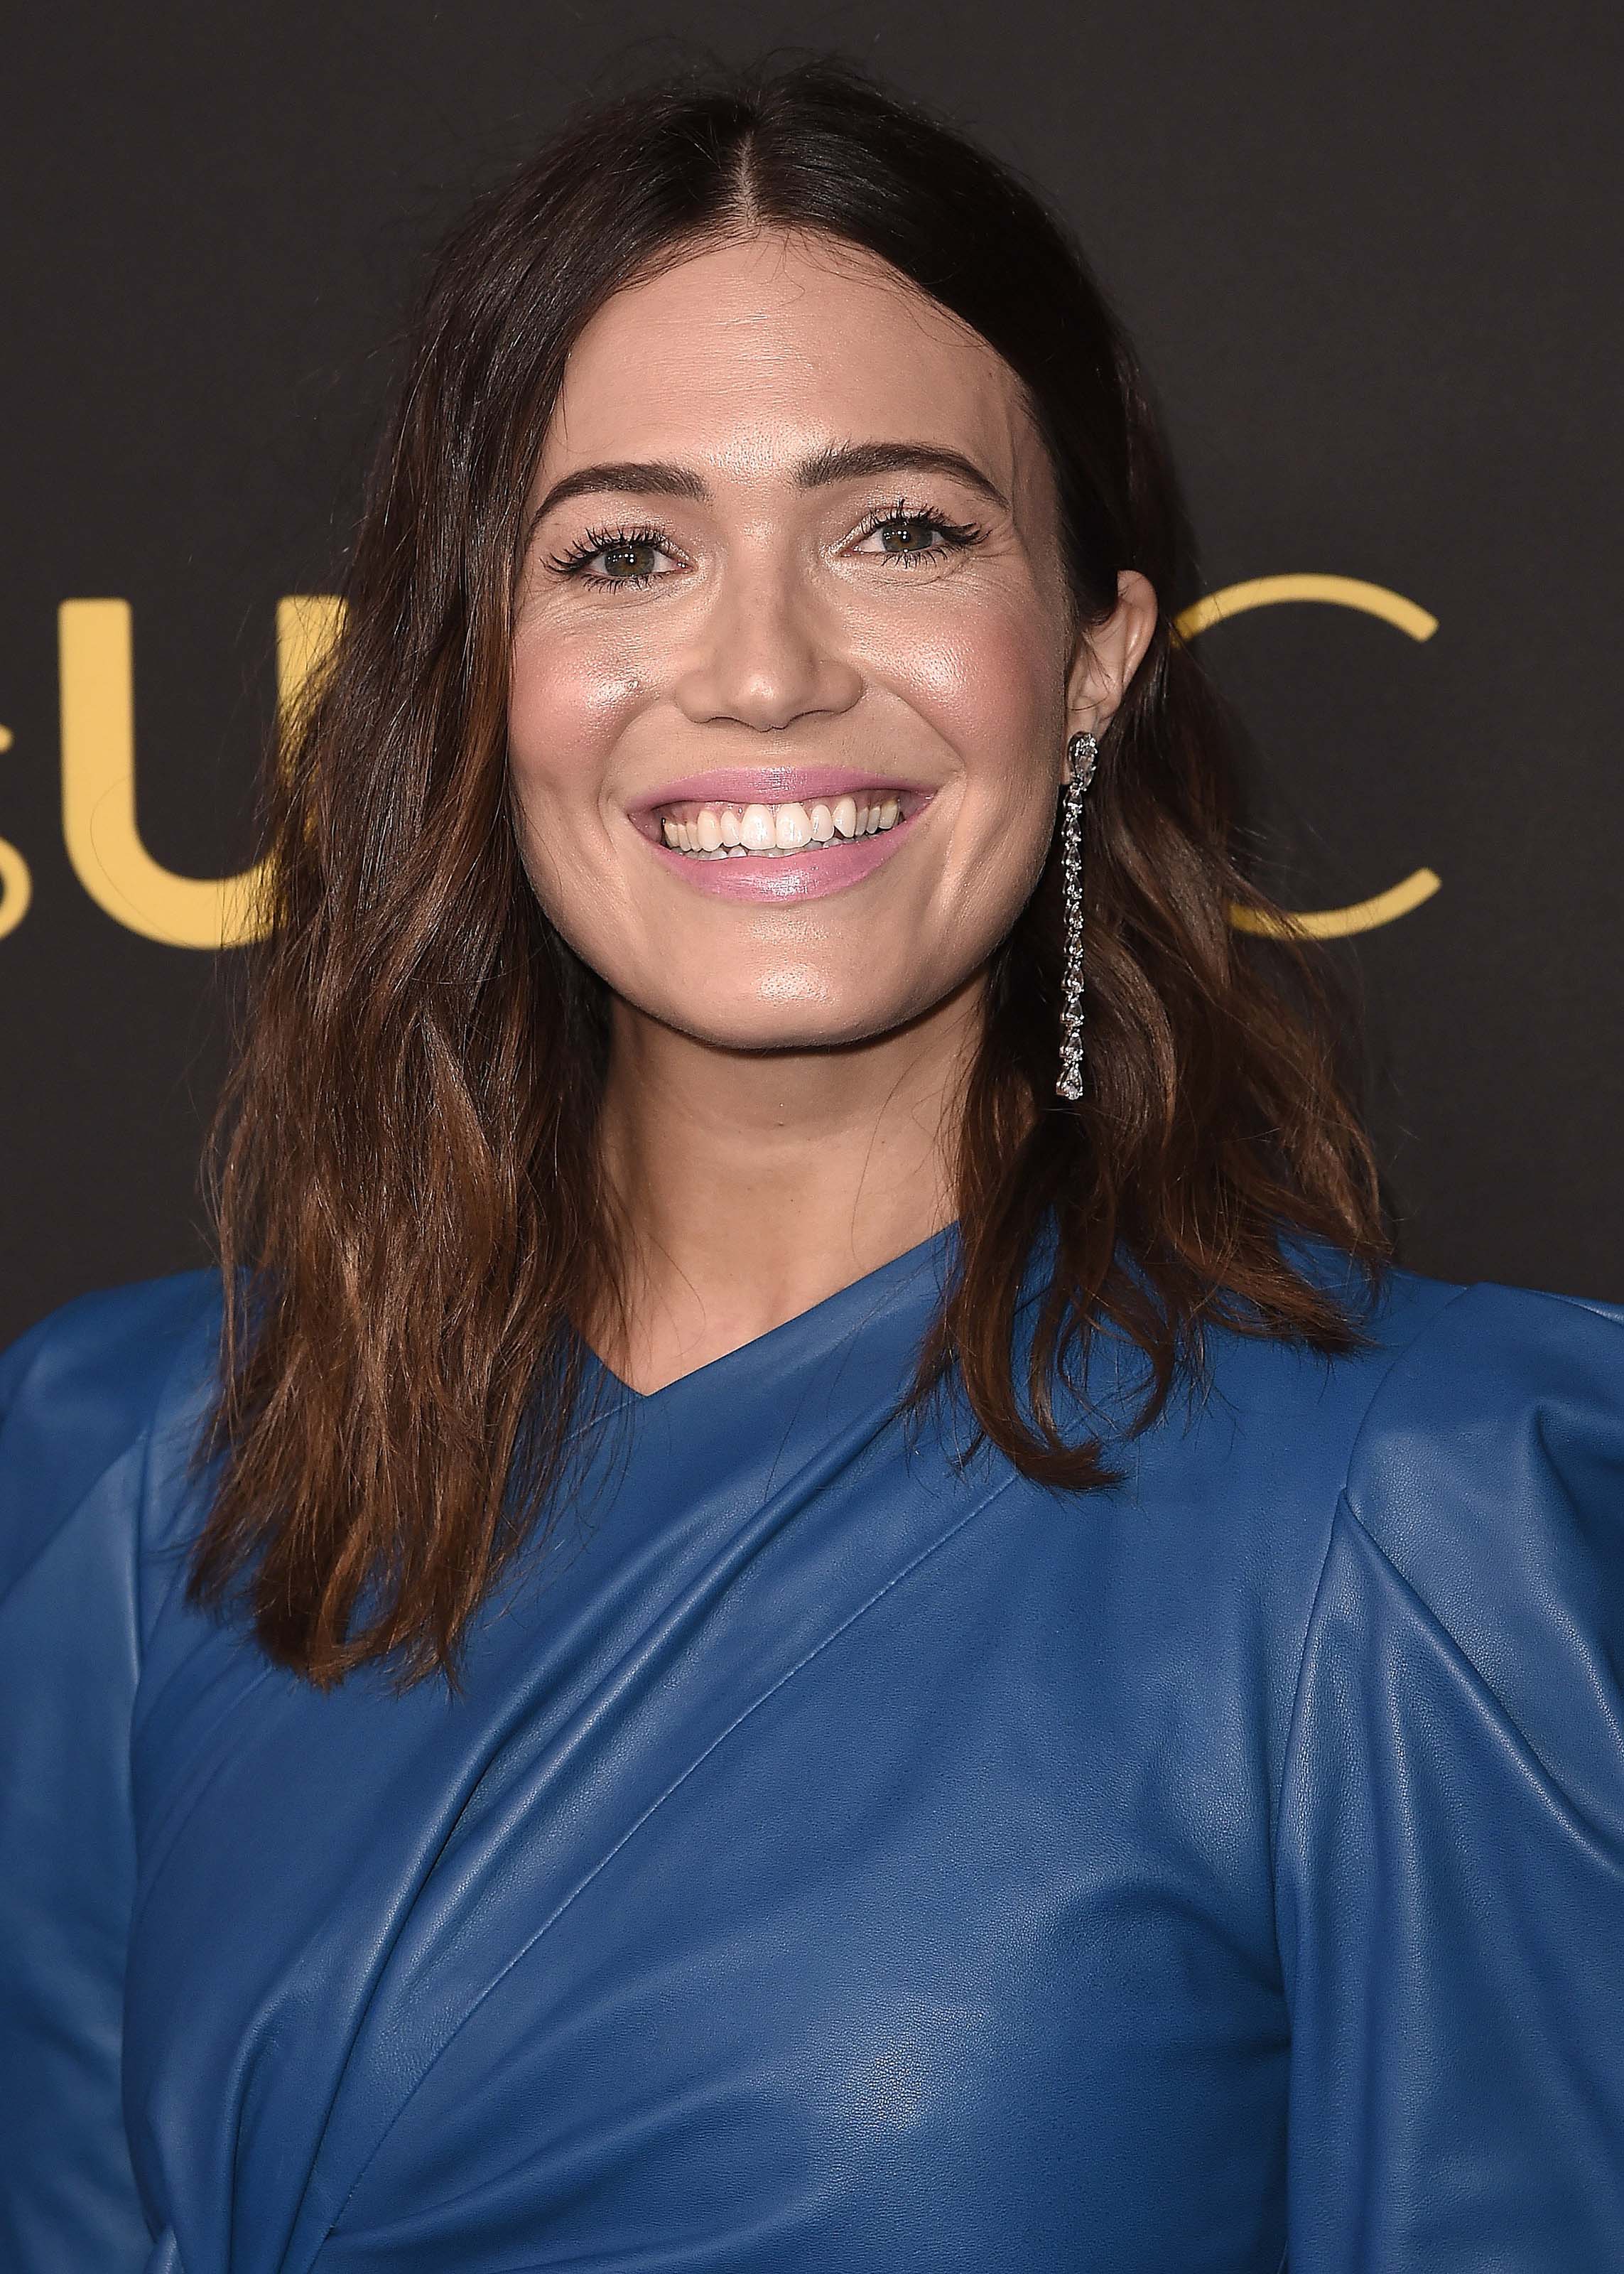 Mandy Moore attends 20th Century Fox Television & NBC’s This Is Us